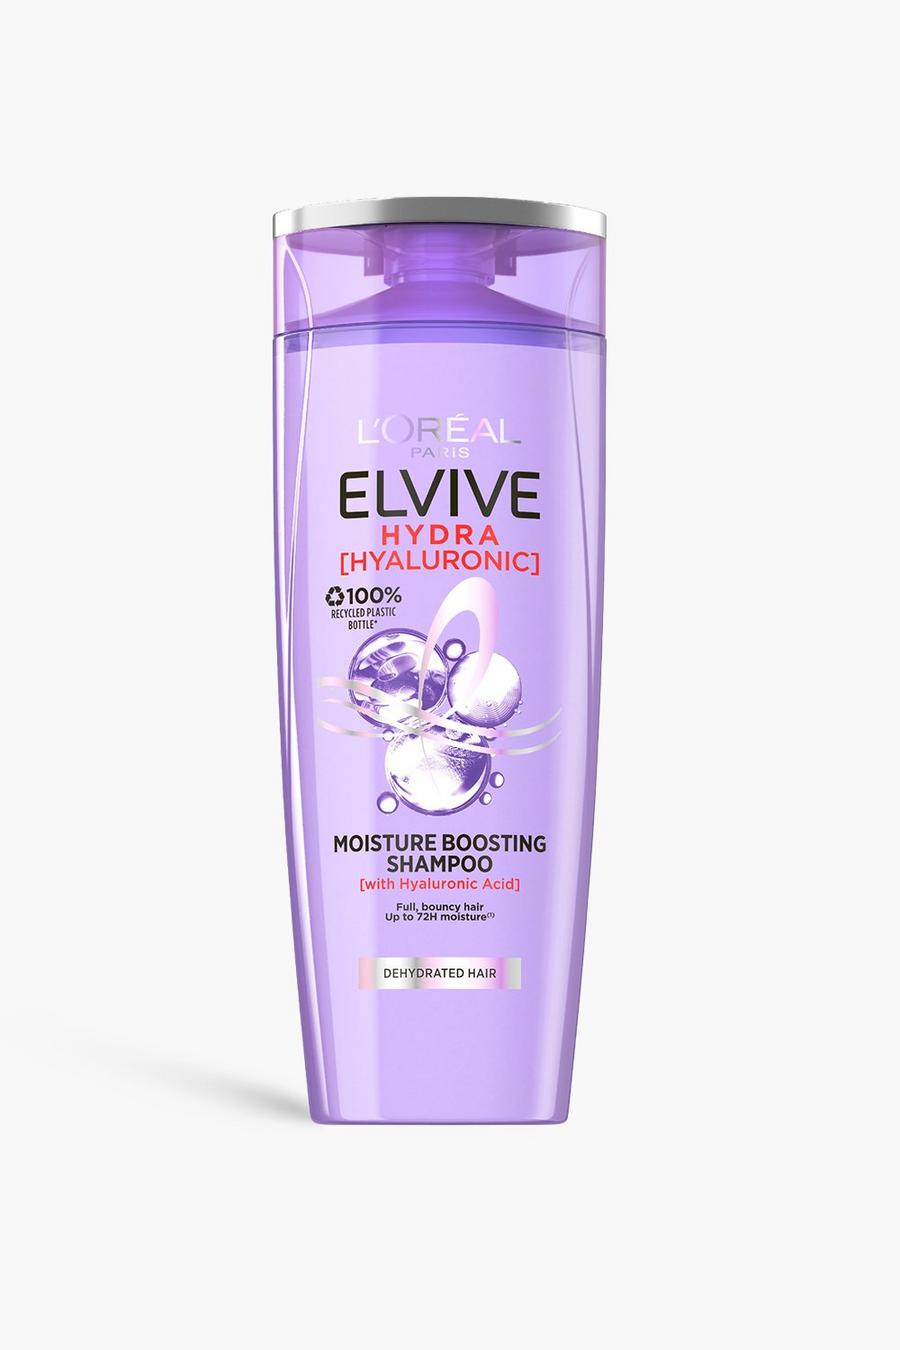 White L'Oreal Elvive Hydra Hyaluronic Acid Shampoo , moisturising for dehydrated hair